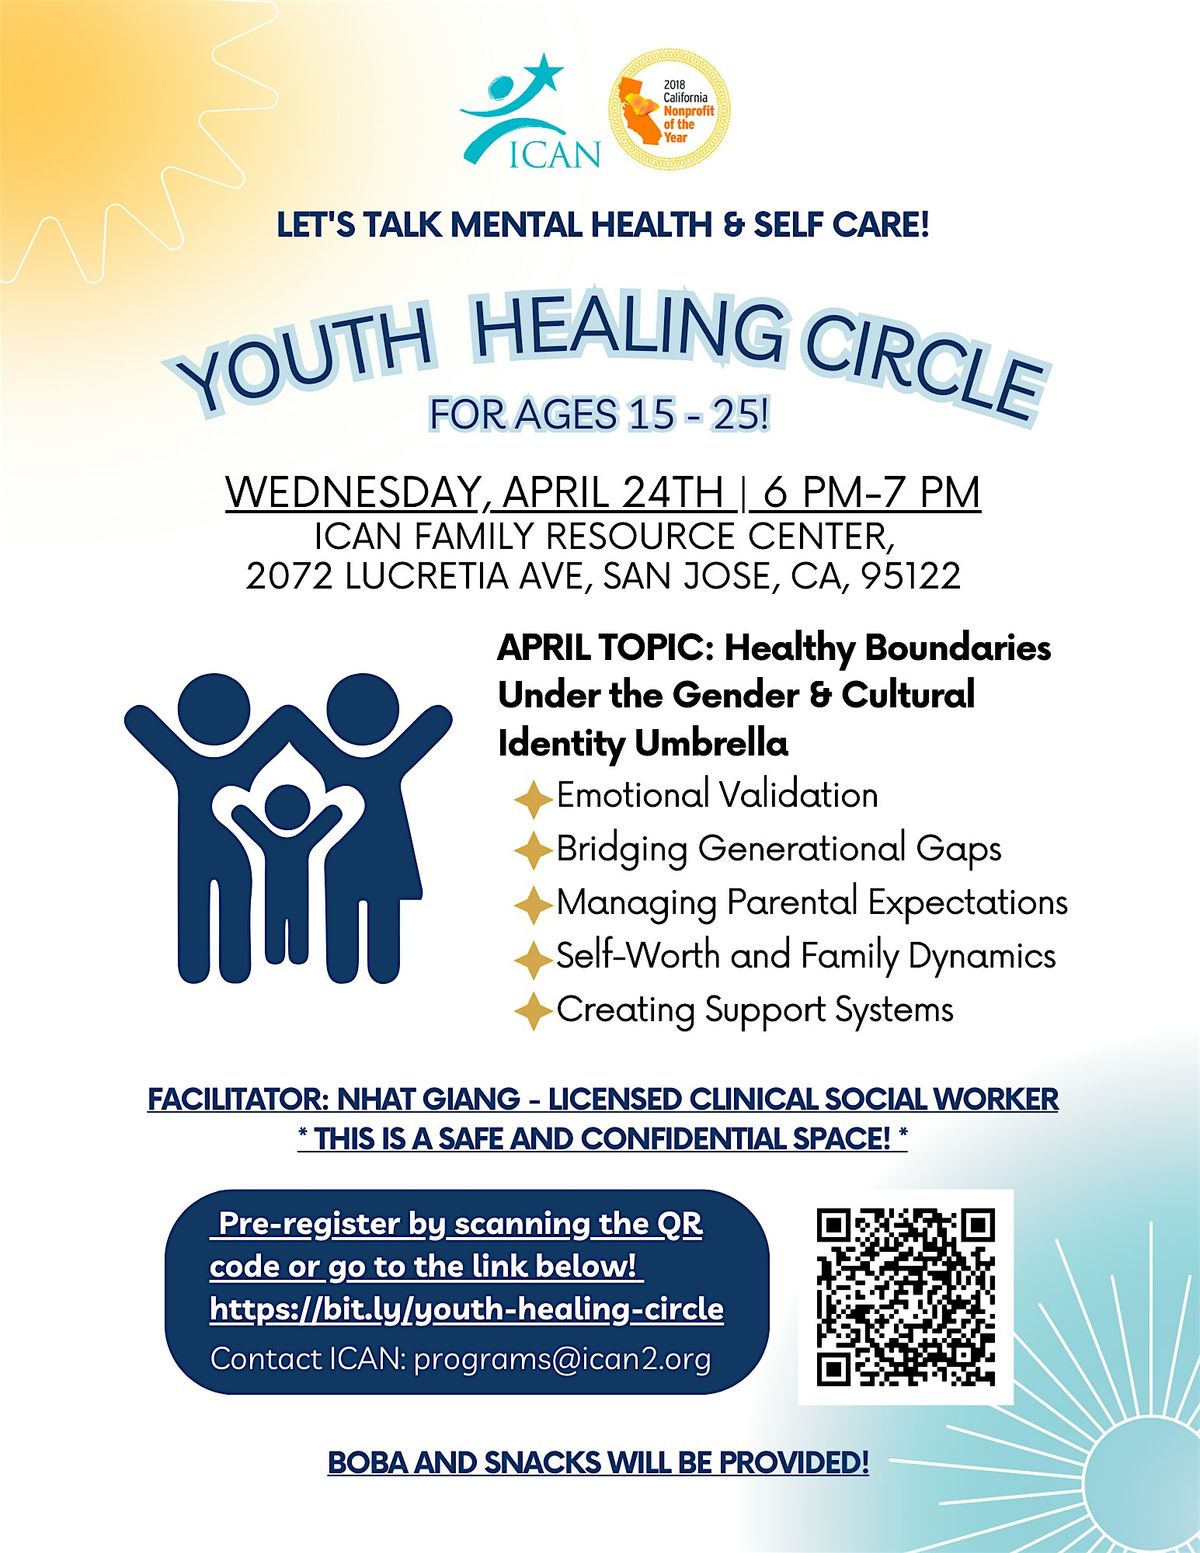 Youth Healing Circle - Discussing Healthy Boundaries